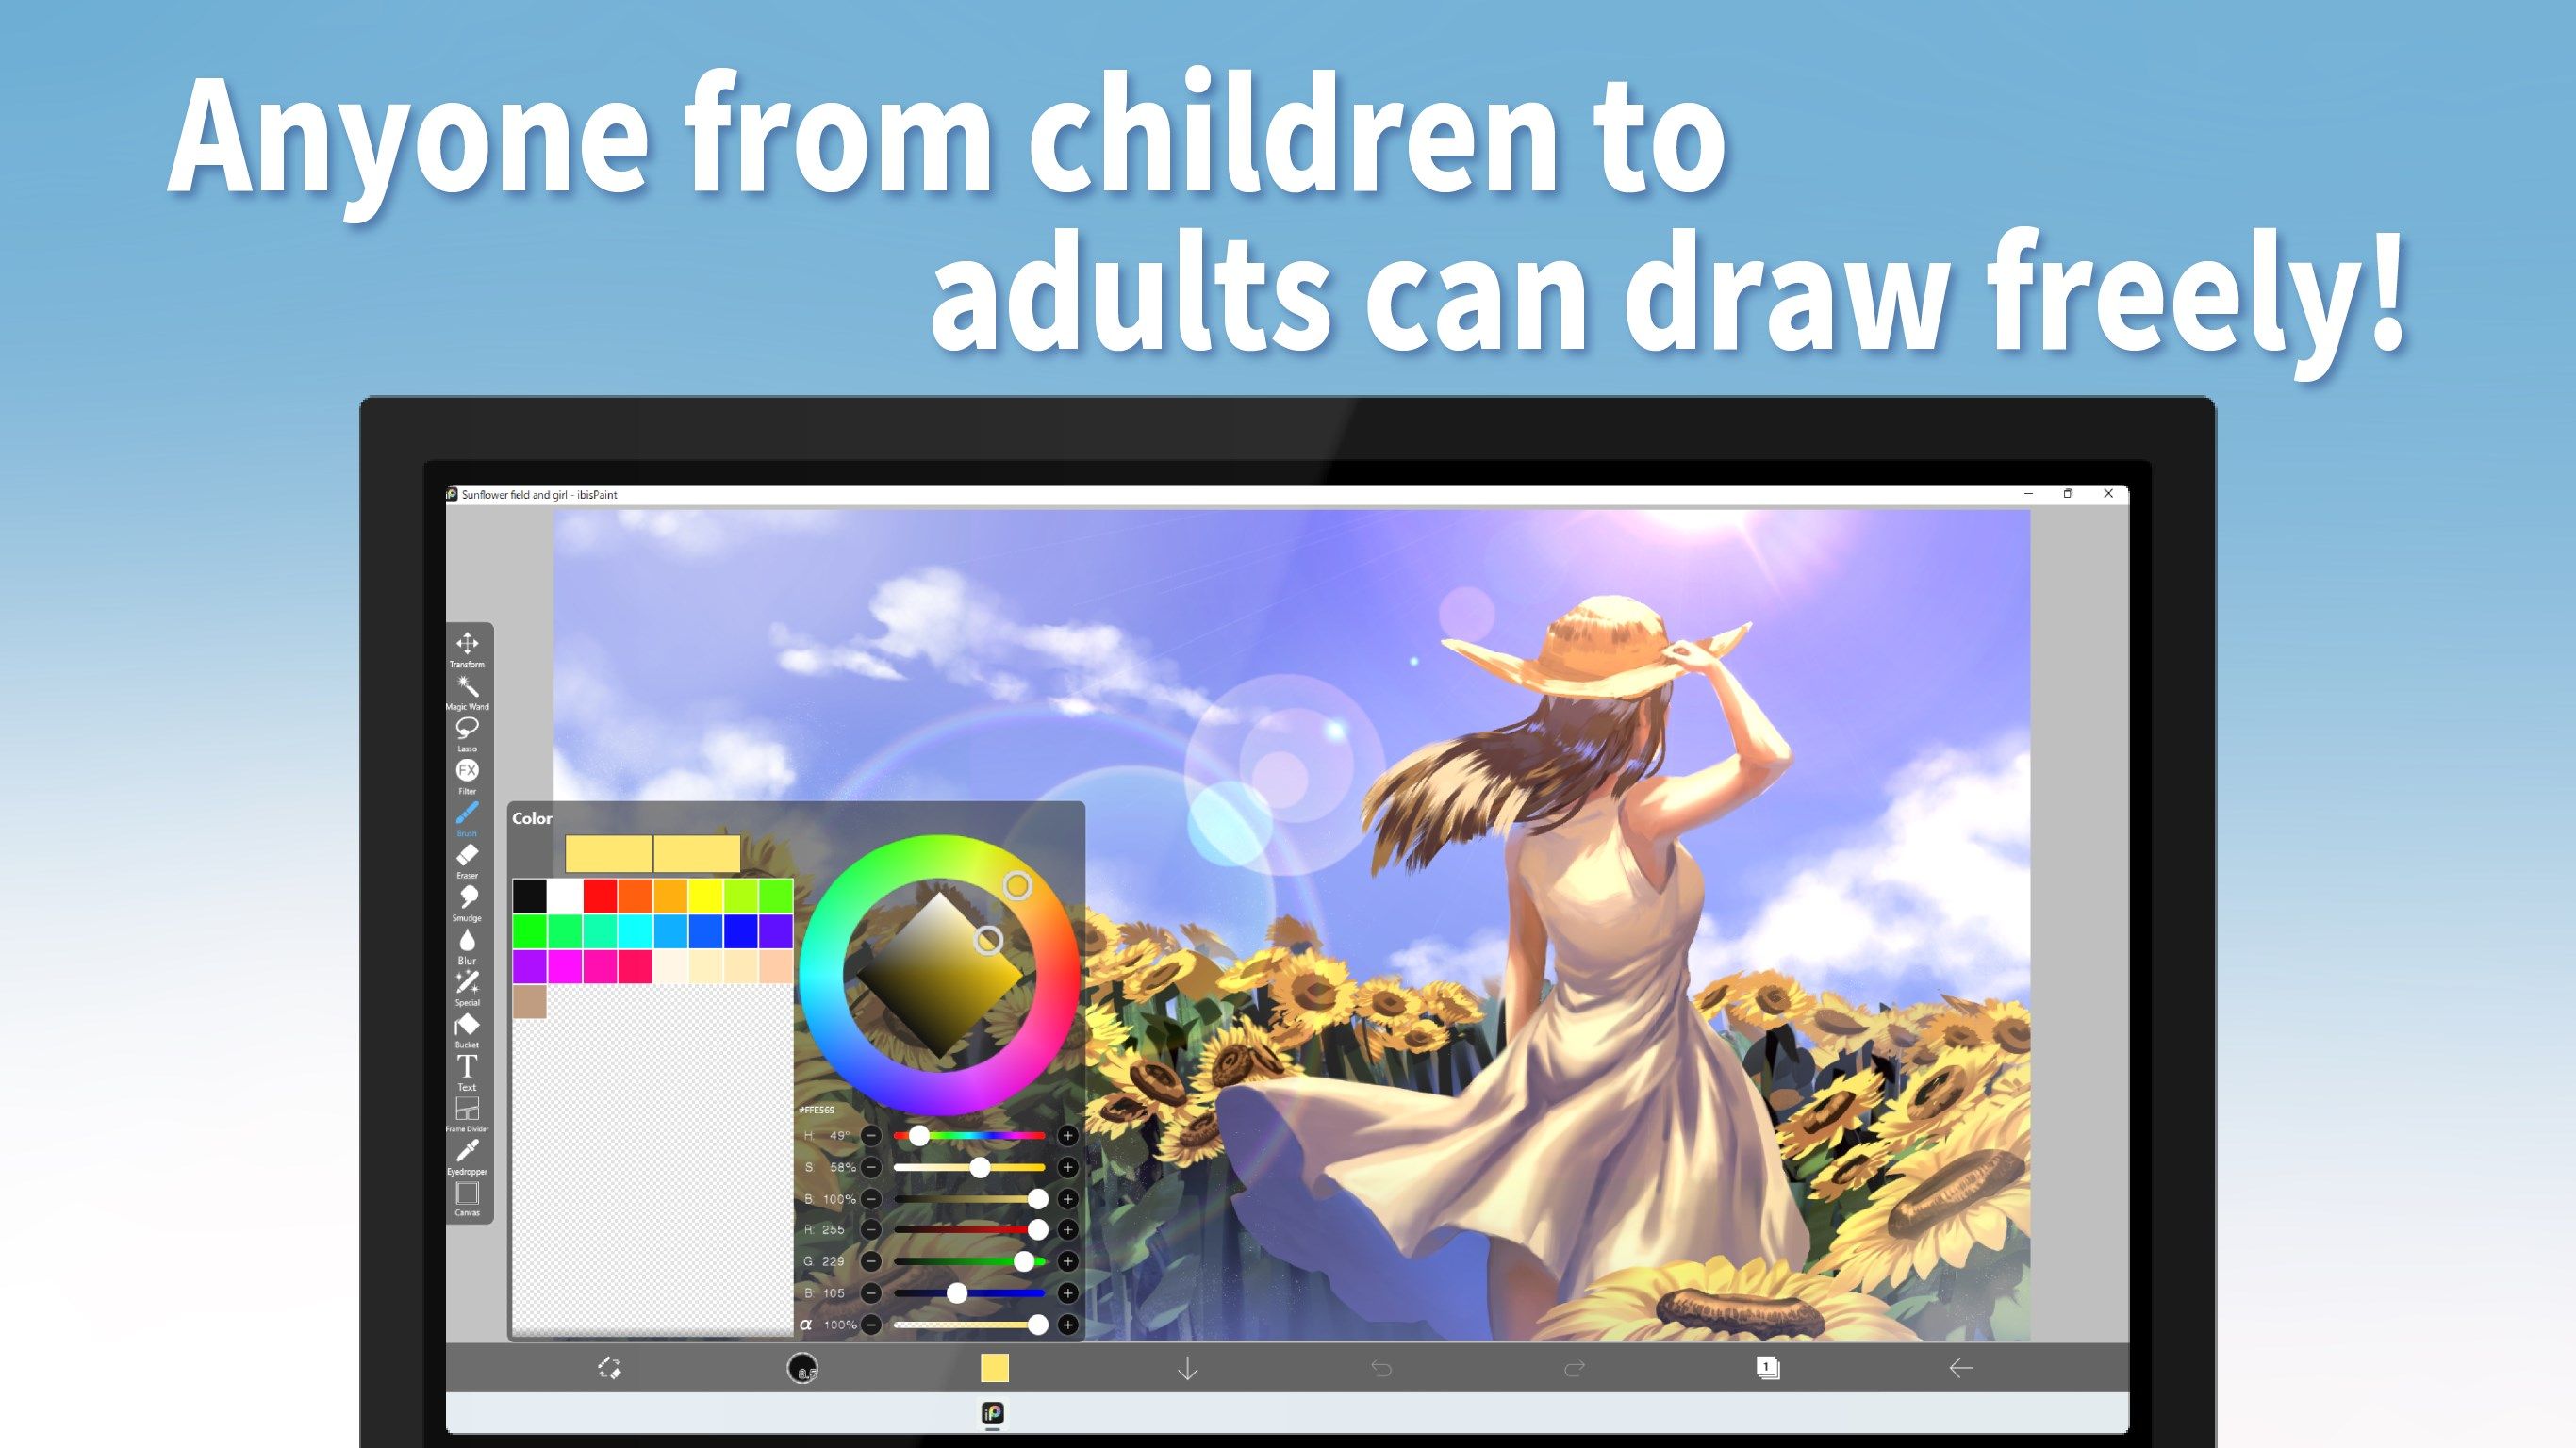 Over 250 million downloads worldwide! The super popular drawing app!